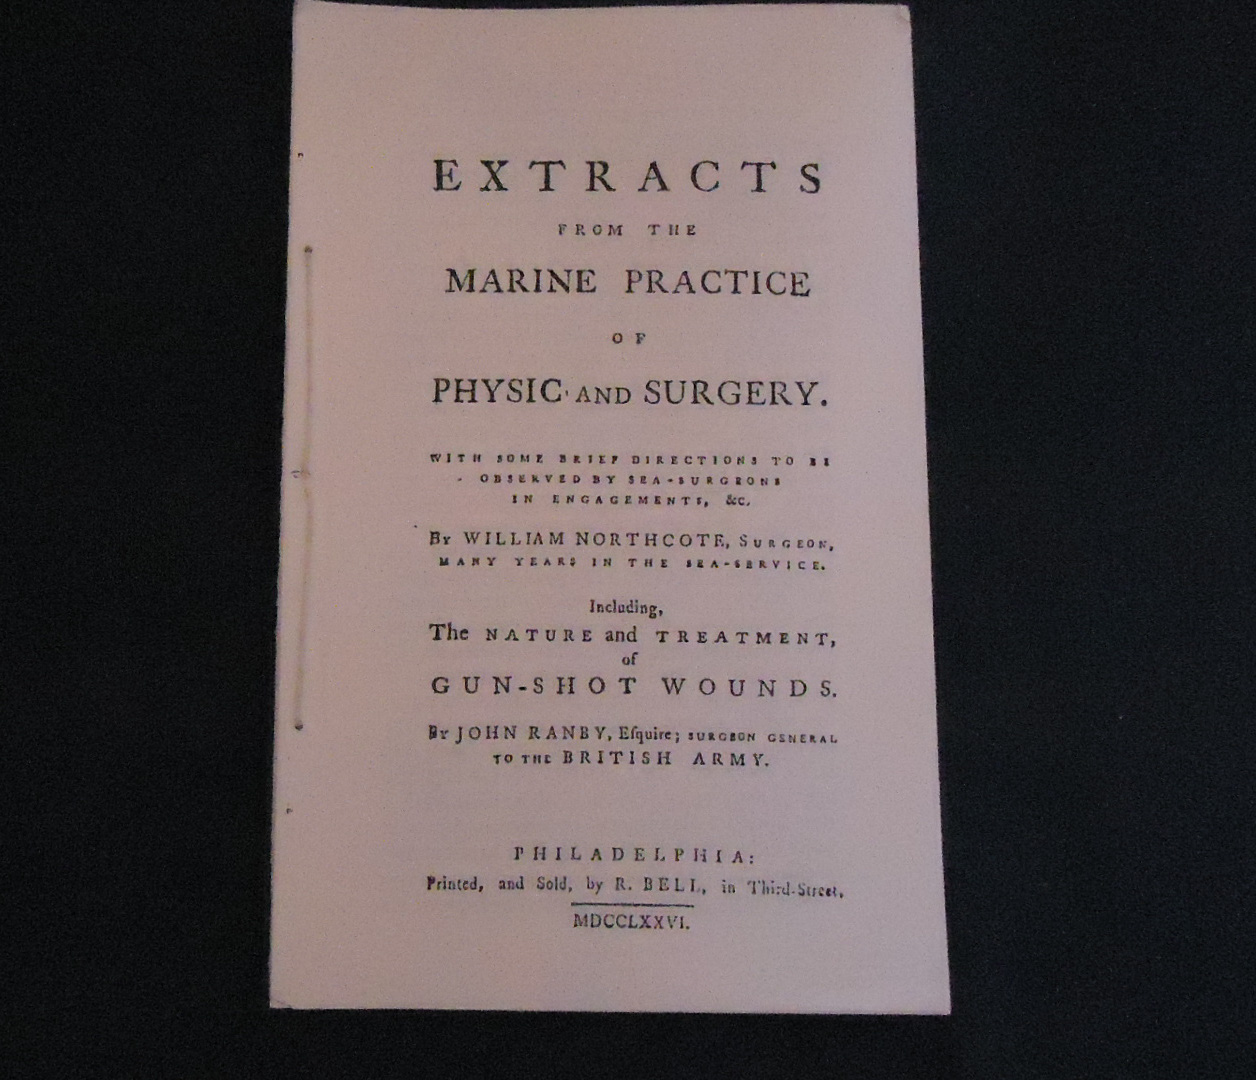 Extracts from the Marine Practice...